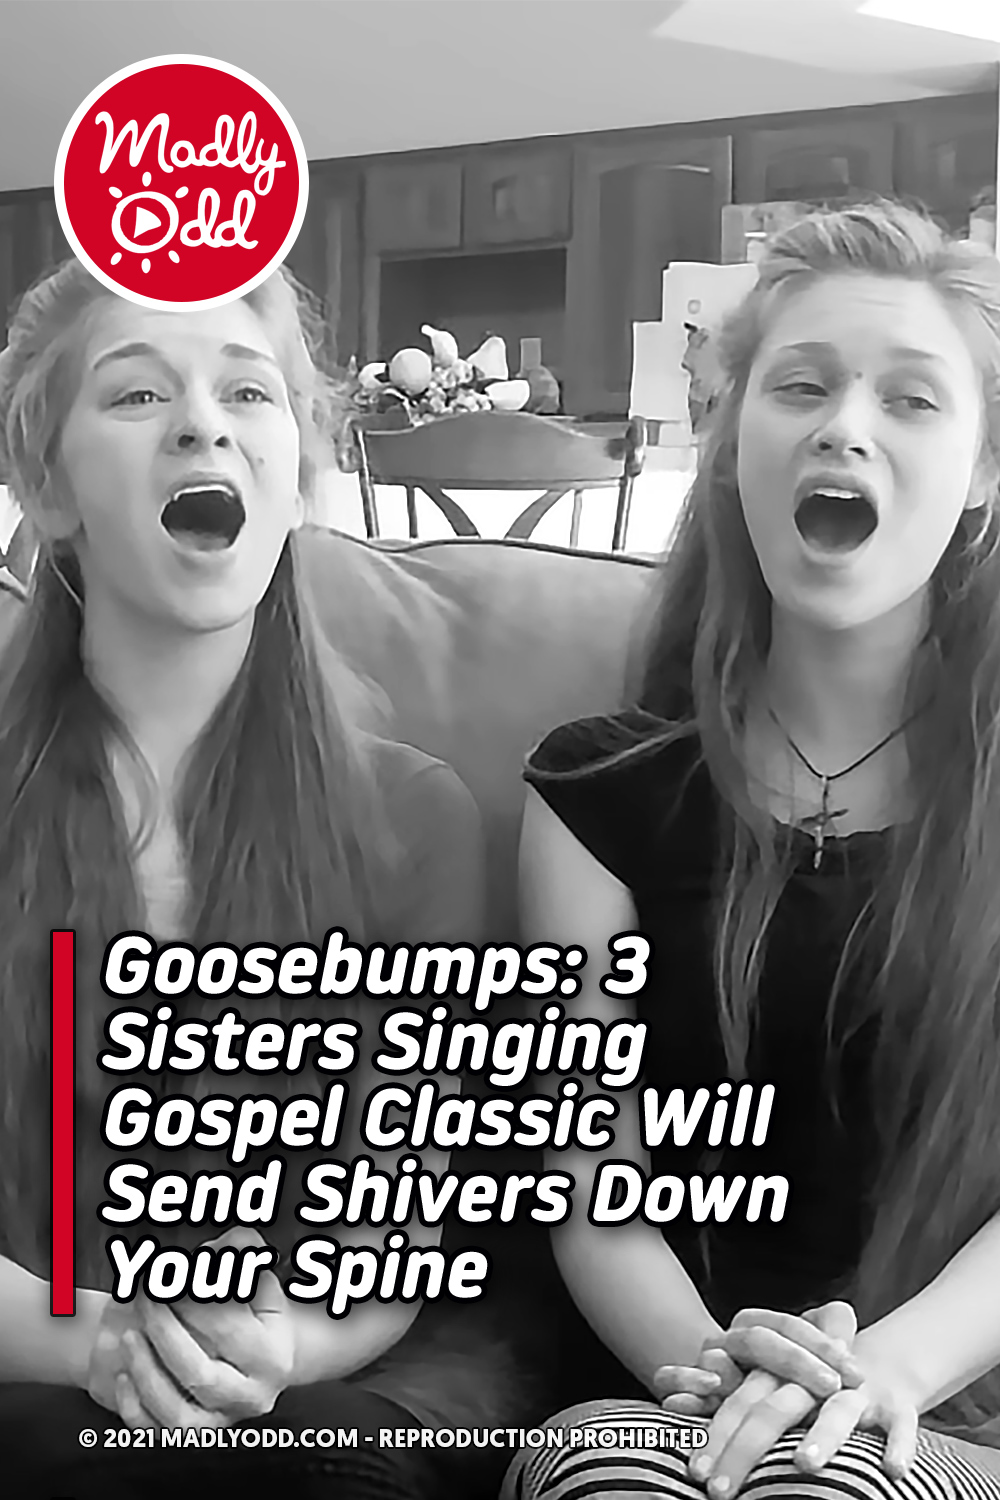 Goosebumps: 3 Sisters Singing Gospel Classic Will Send Shivers Down Your Spine